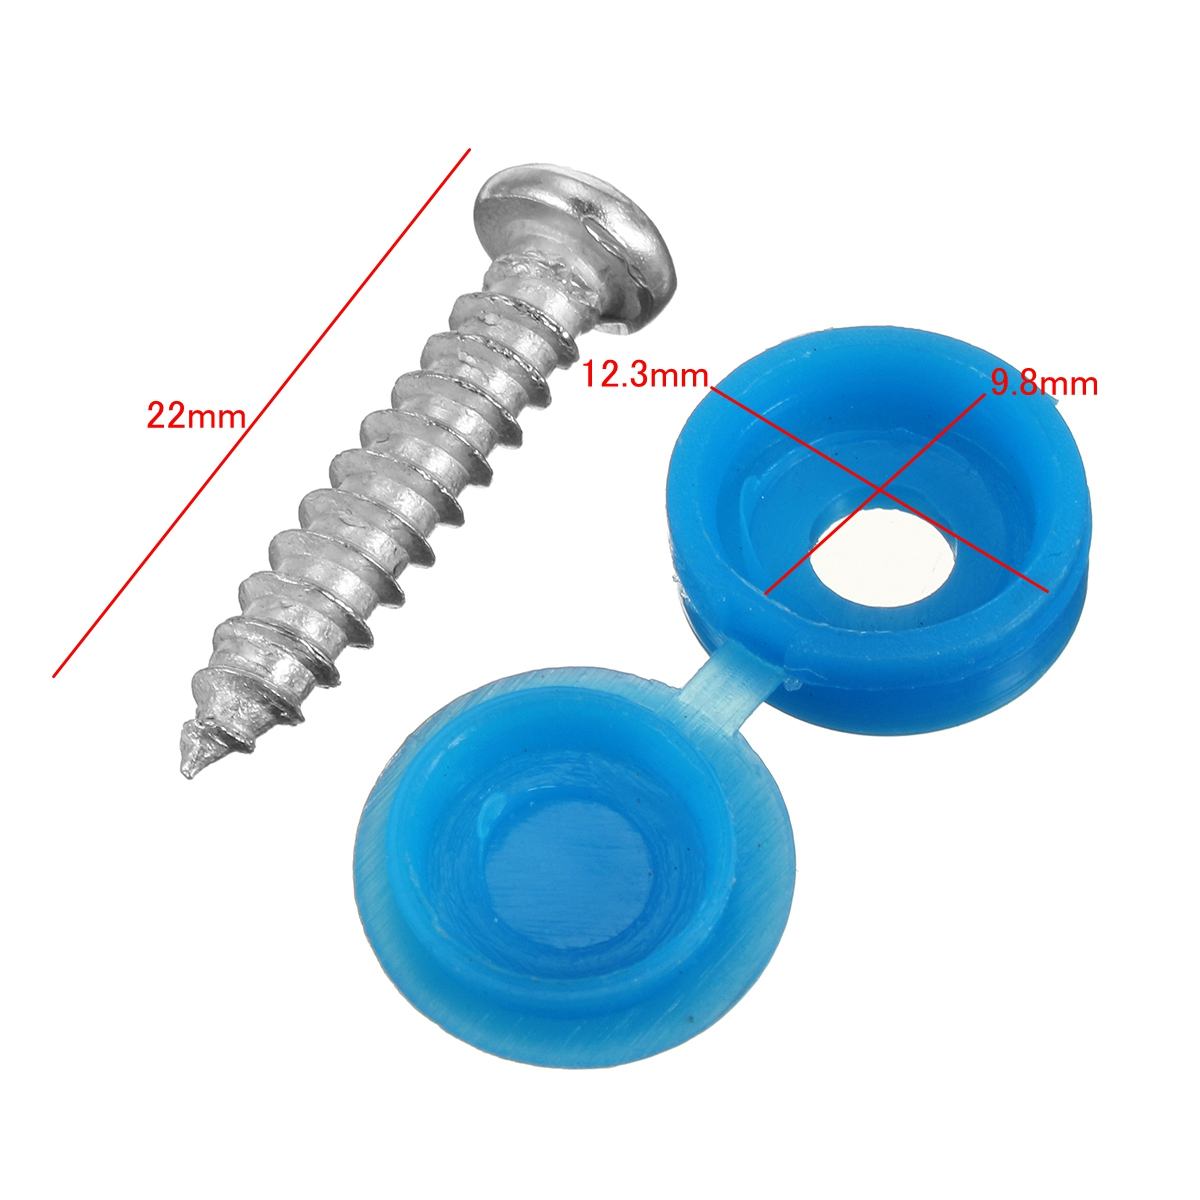 16pcs Universal Car Blue 22mm Number Plate Fixing Screws Caps Bolts Nuts Fitting Fixing Kit